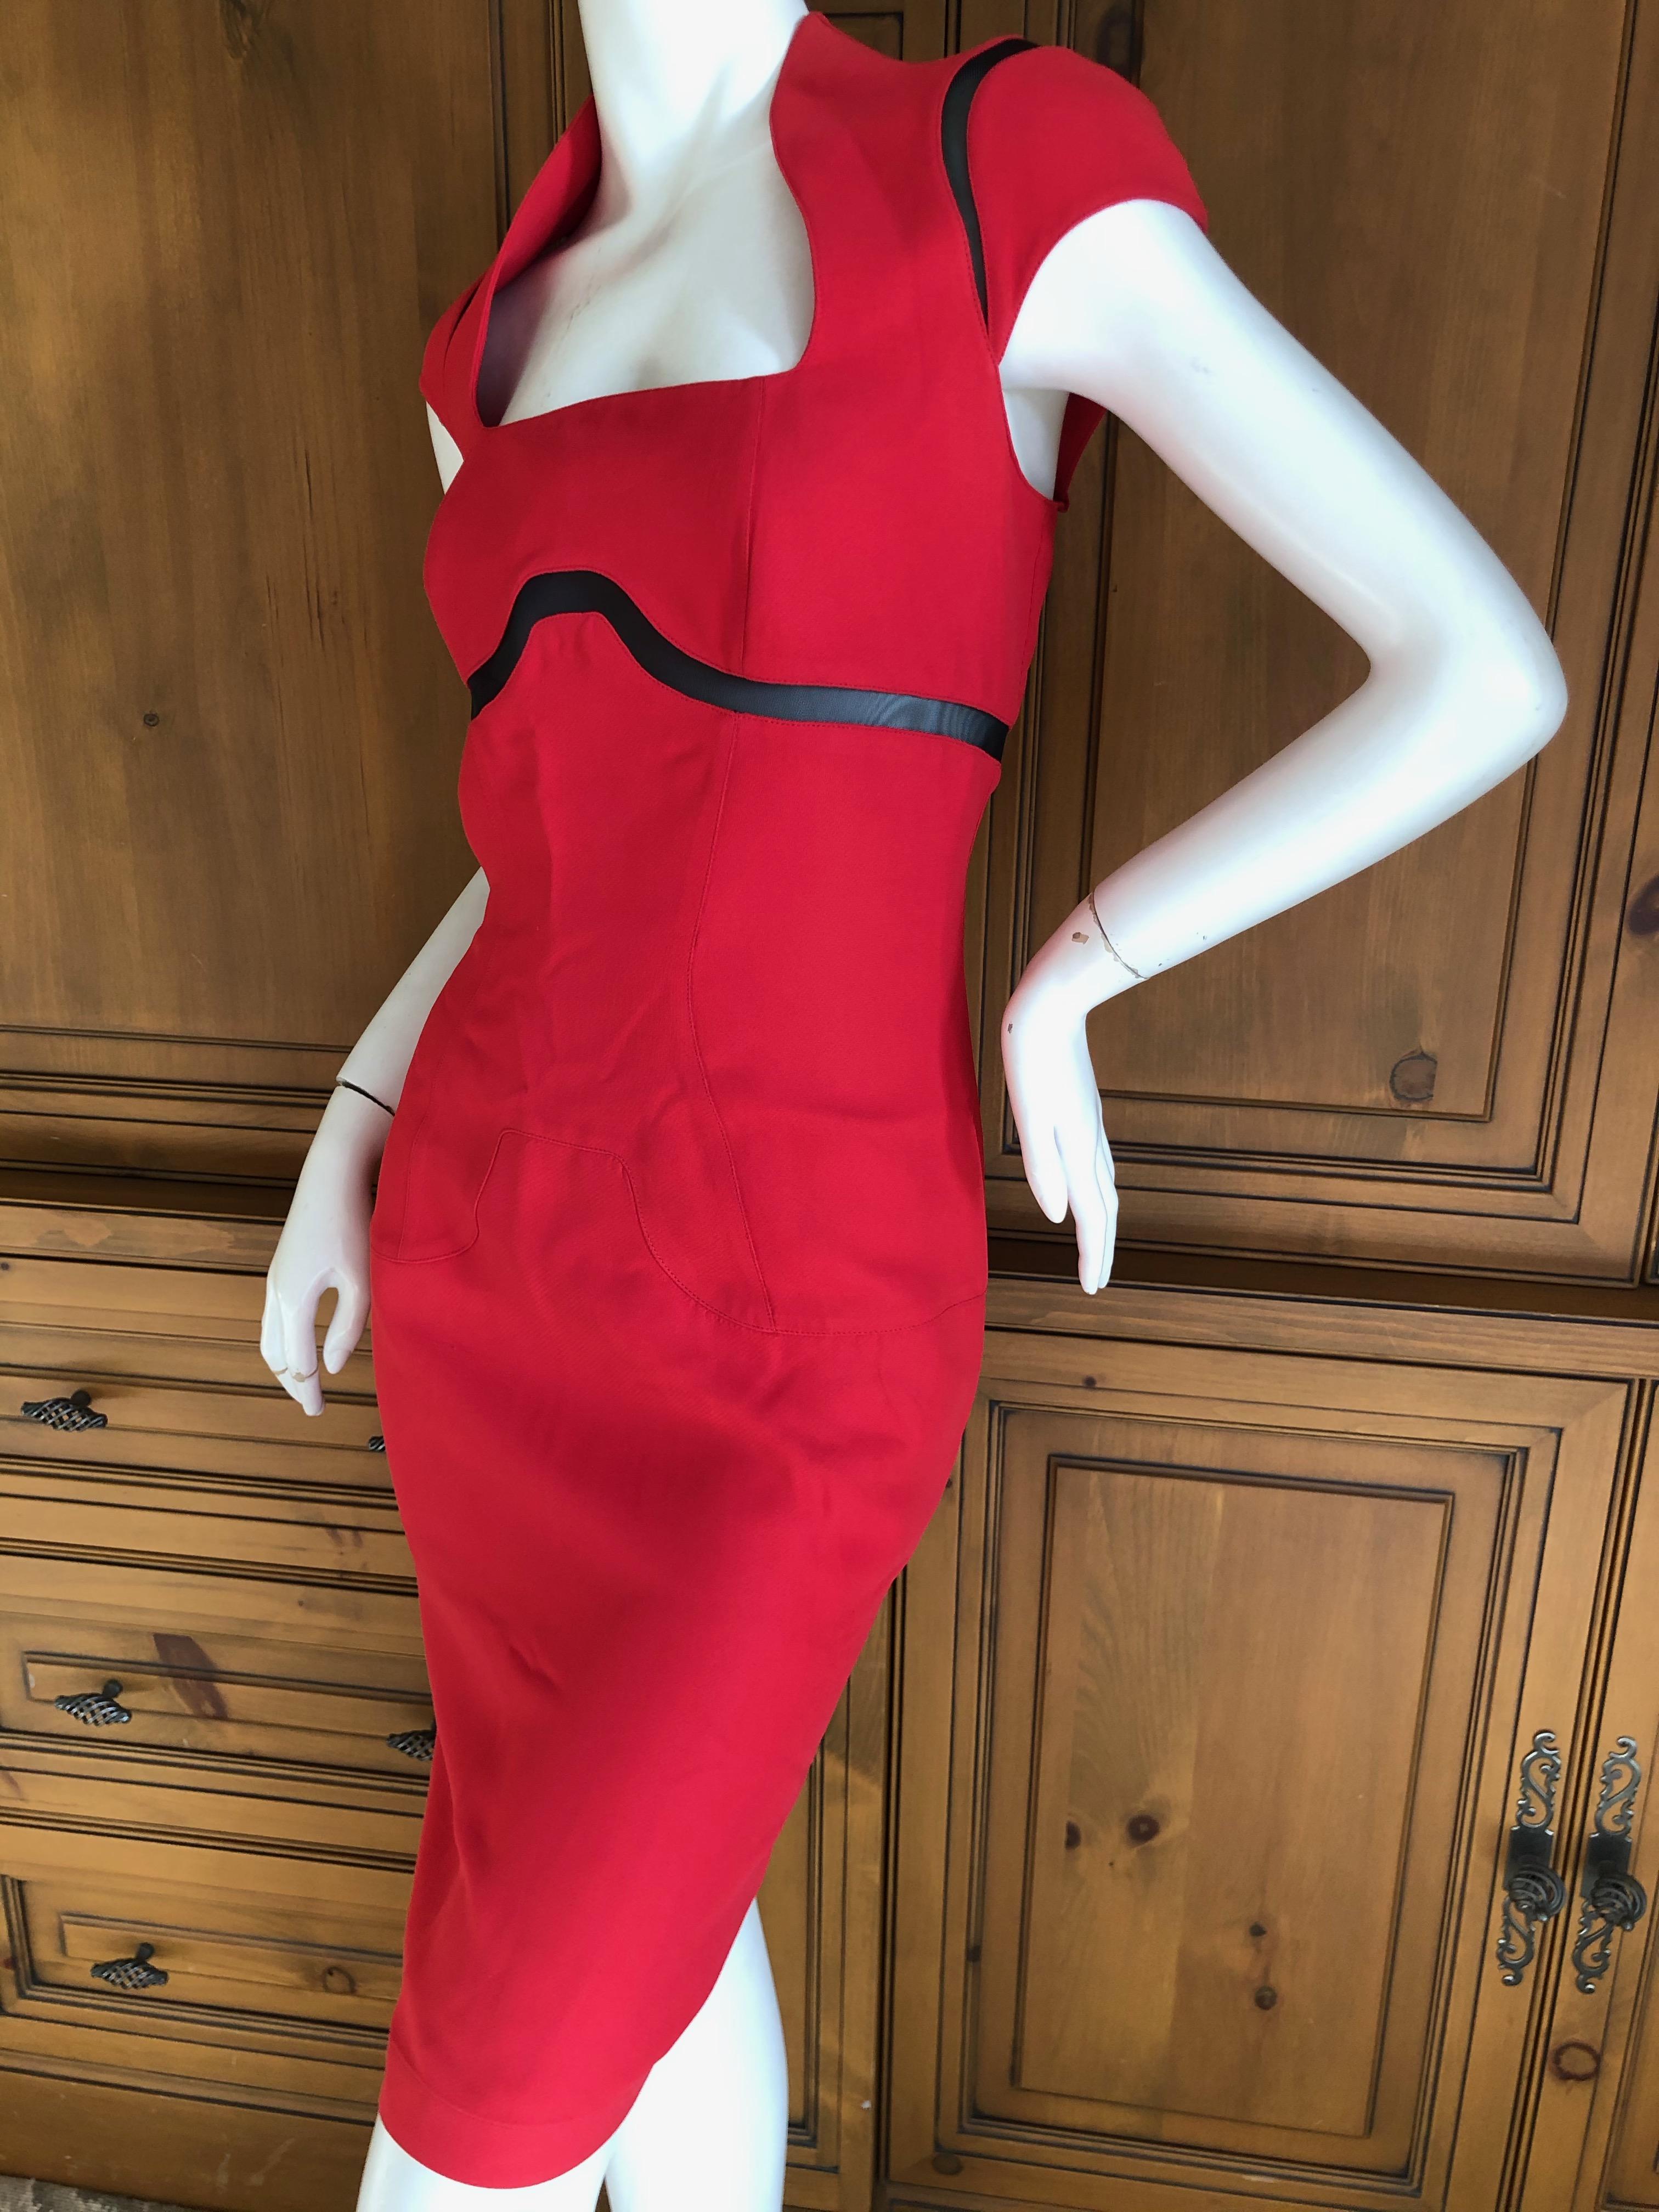 Thierry Mugler Vintage 1980's Red Cocktail Dress with Sheer Inserts For Sale 3